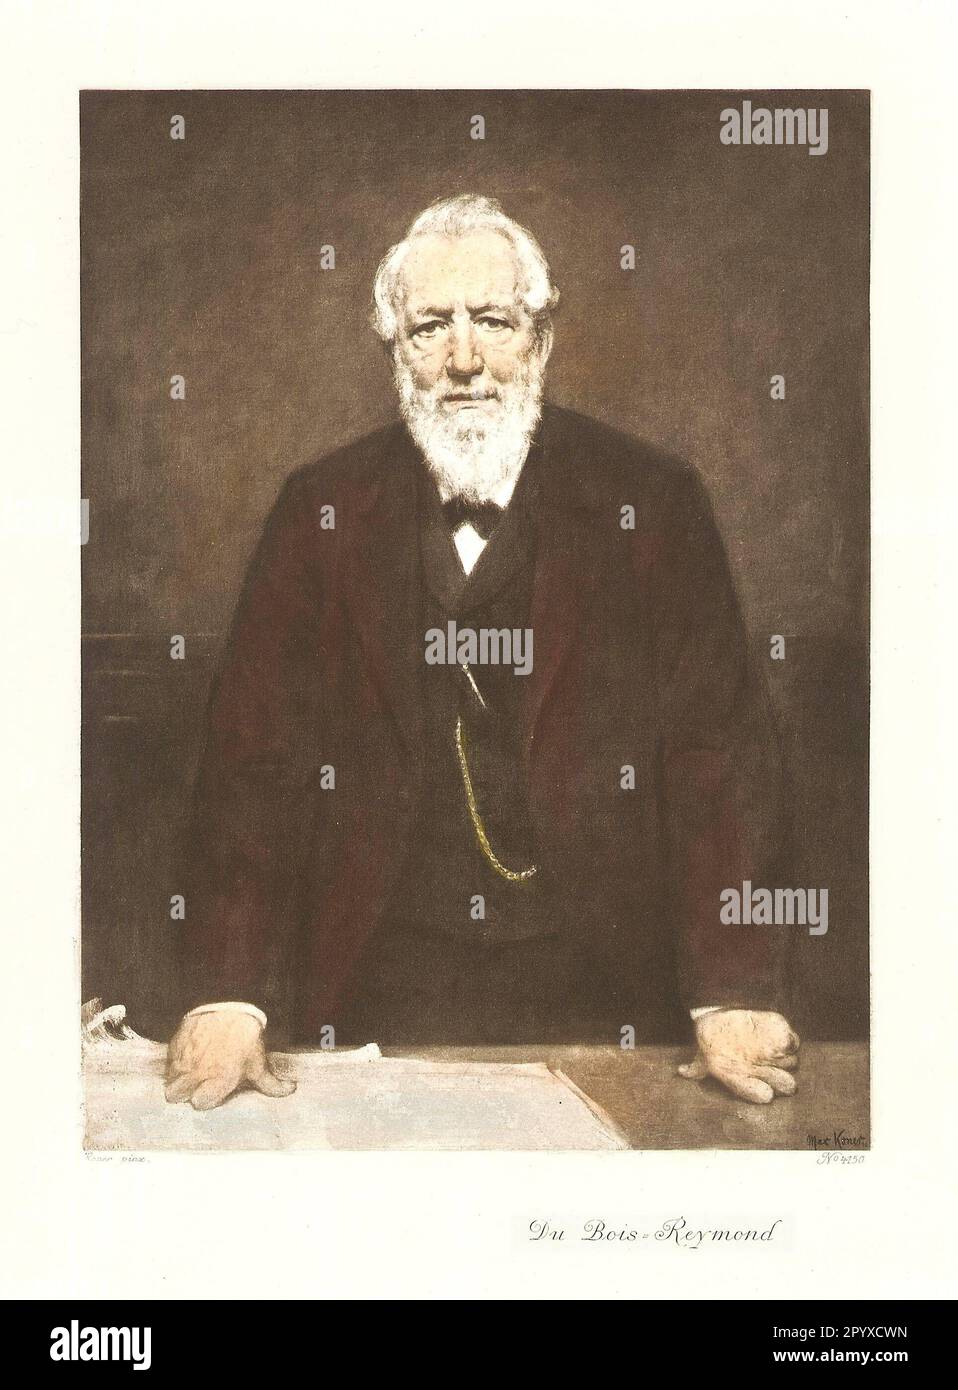 Emil Du Bois-Reymond (1818-1896), German physiologist. Painting by Max Kerber from 1896. Photo: Heliogravure, Corpus Imaginum, Hanfstaengl Collection. [automated translation] Stock Photo